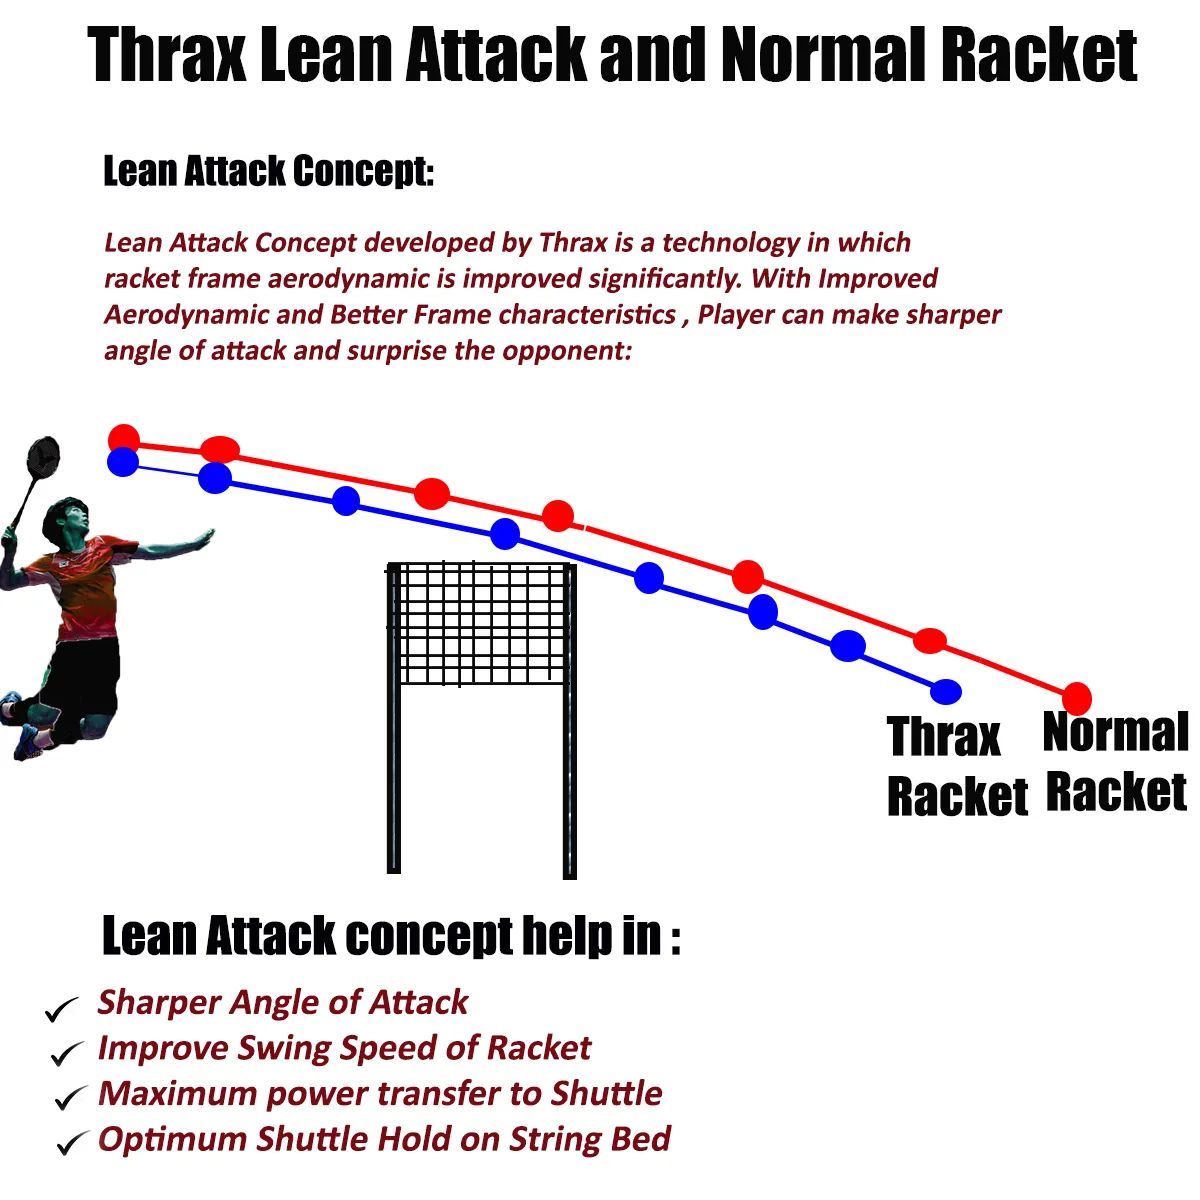 Thrax_Furious_xm_20_Racket_Thrax_Lean_Attack_and_Normal_Racket_Technology.jpg